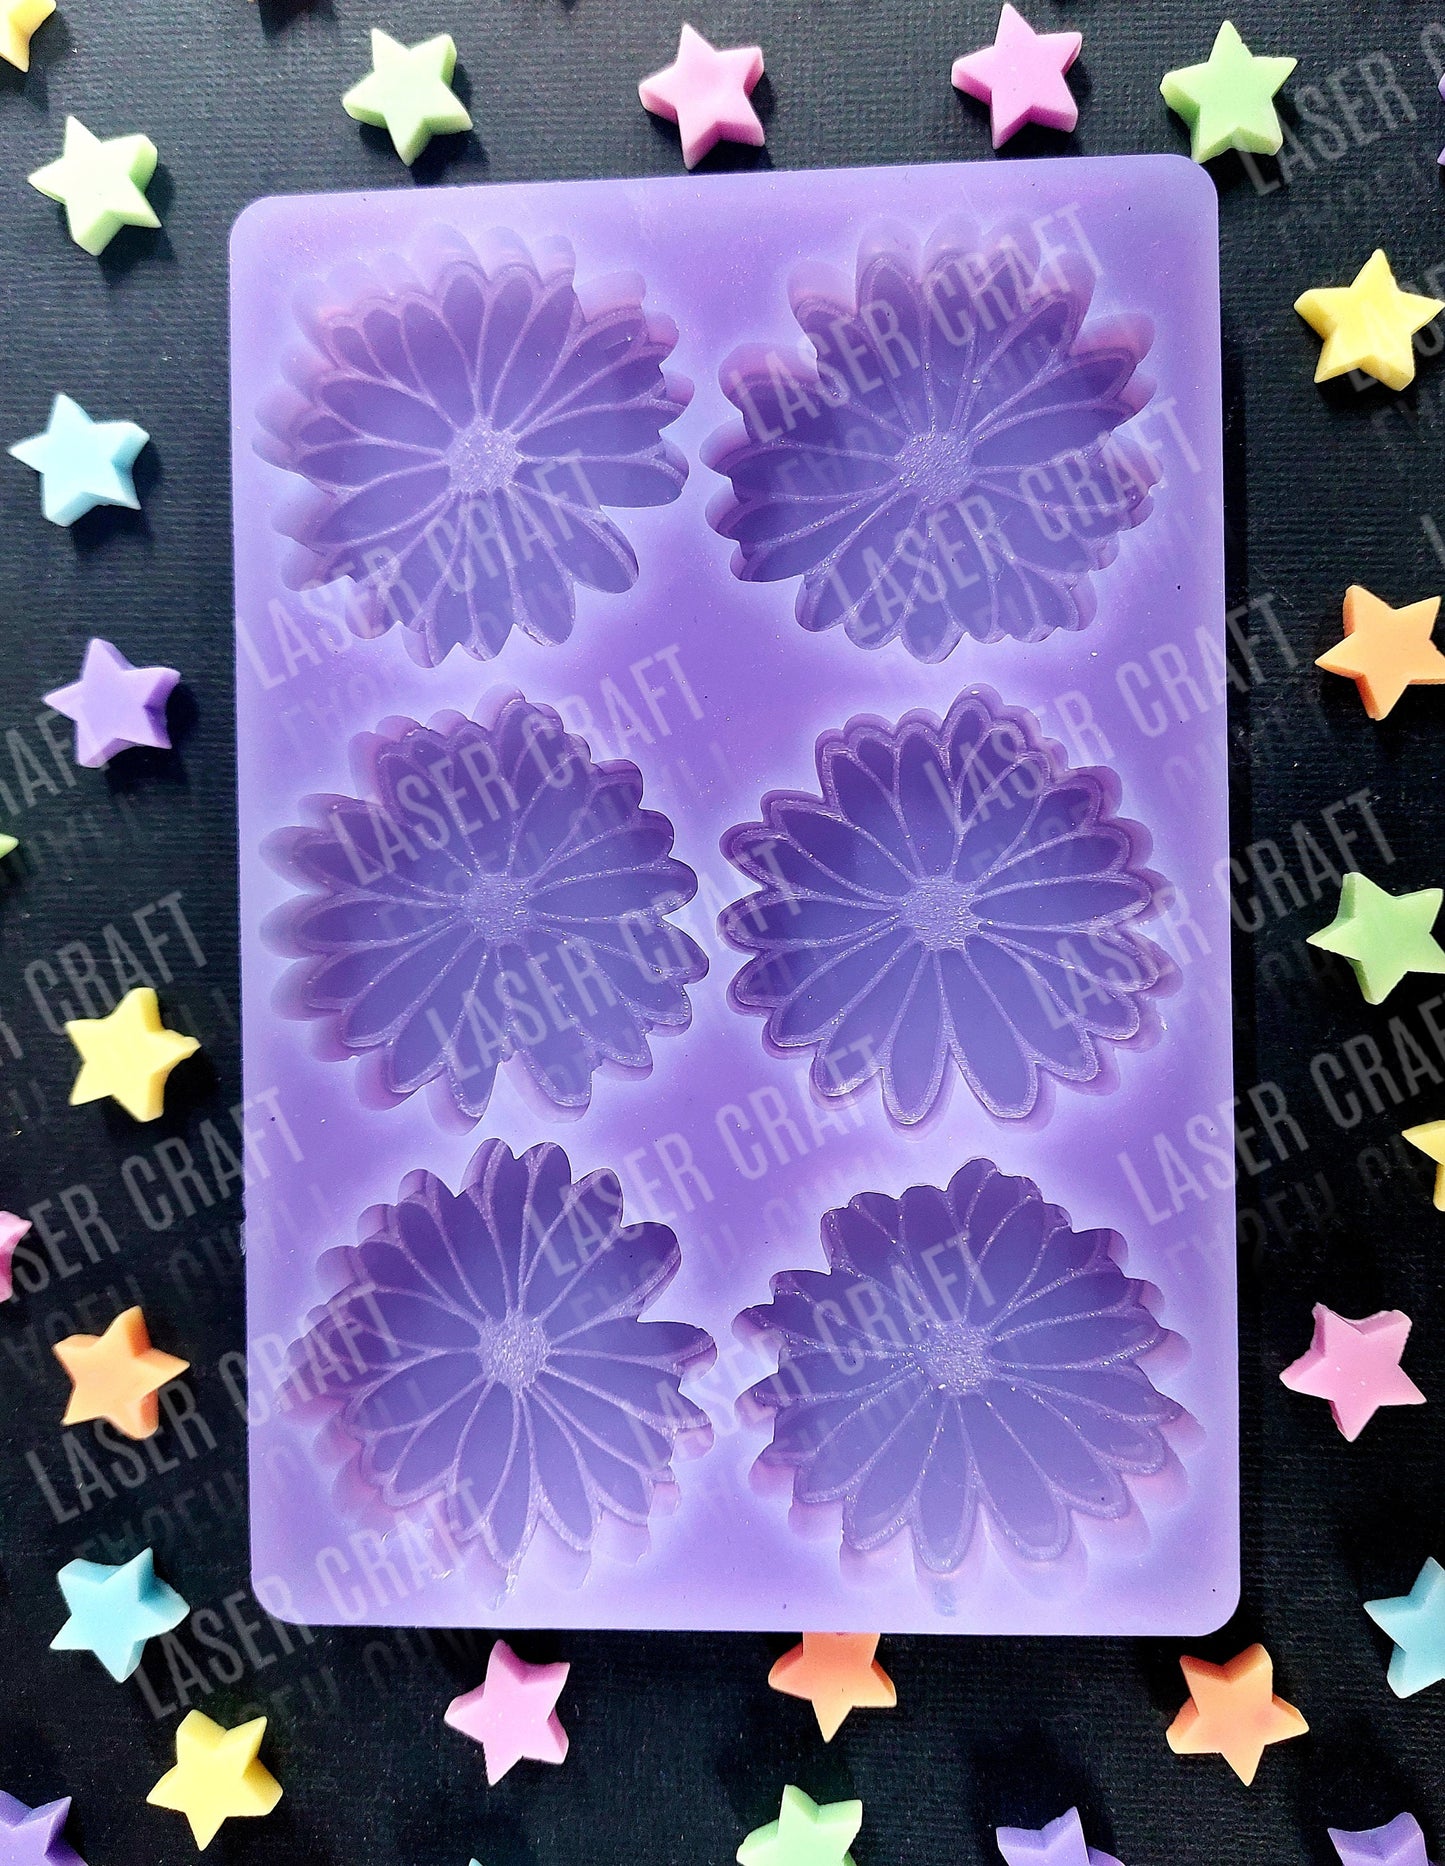 Daisy 6 Piece Flower Silicone Mould for wax, resin, soap etc